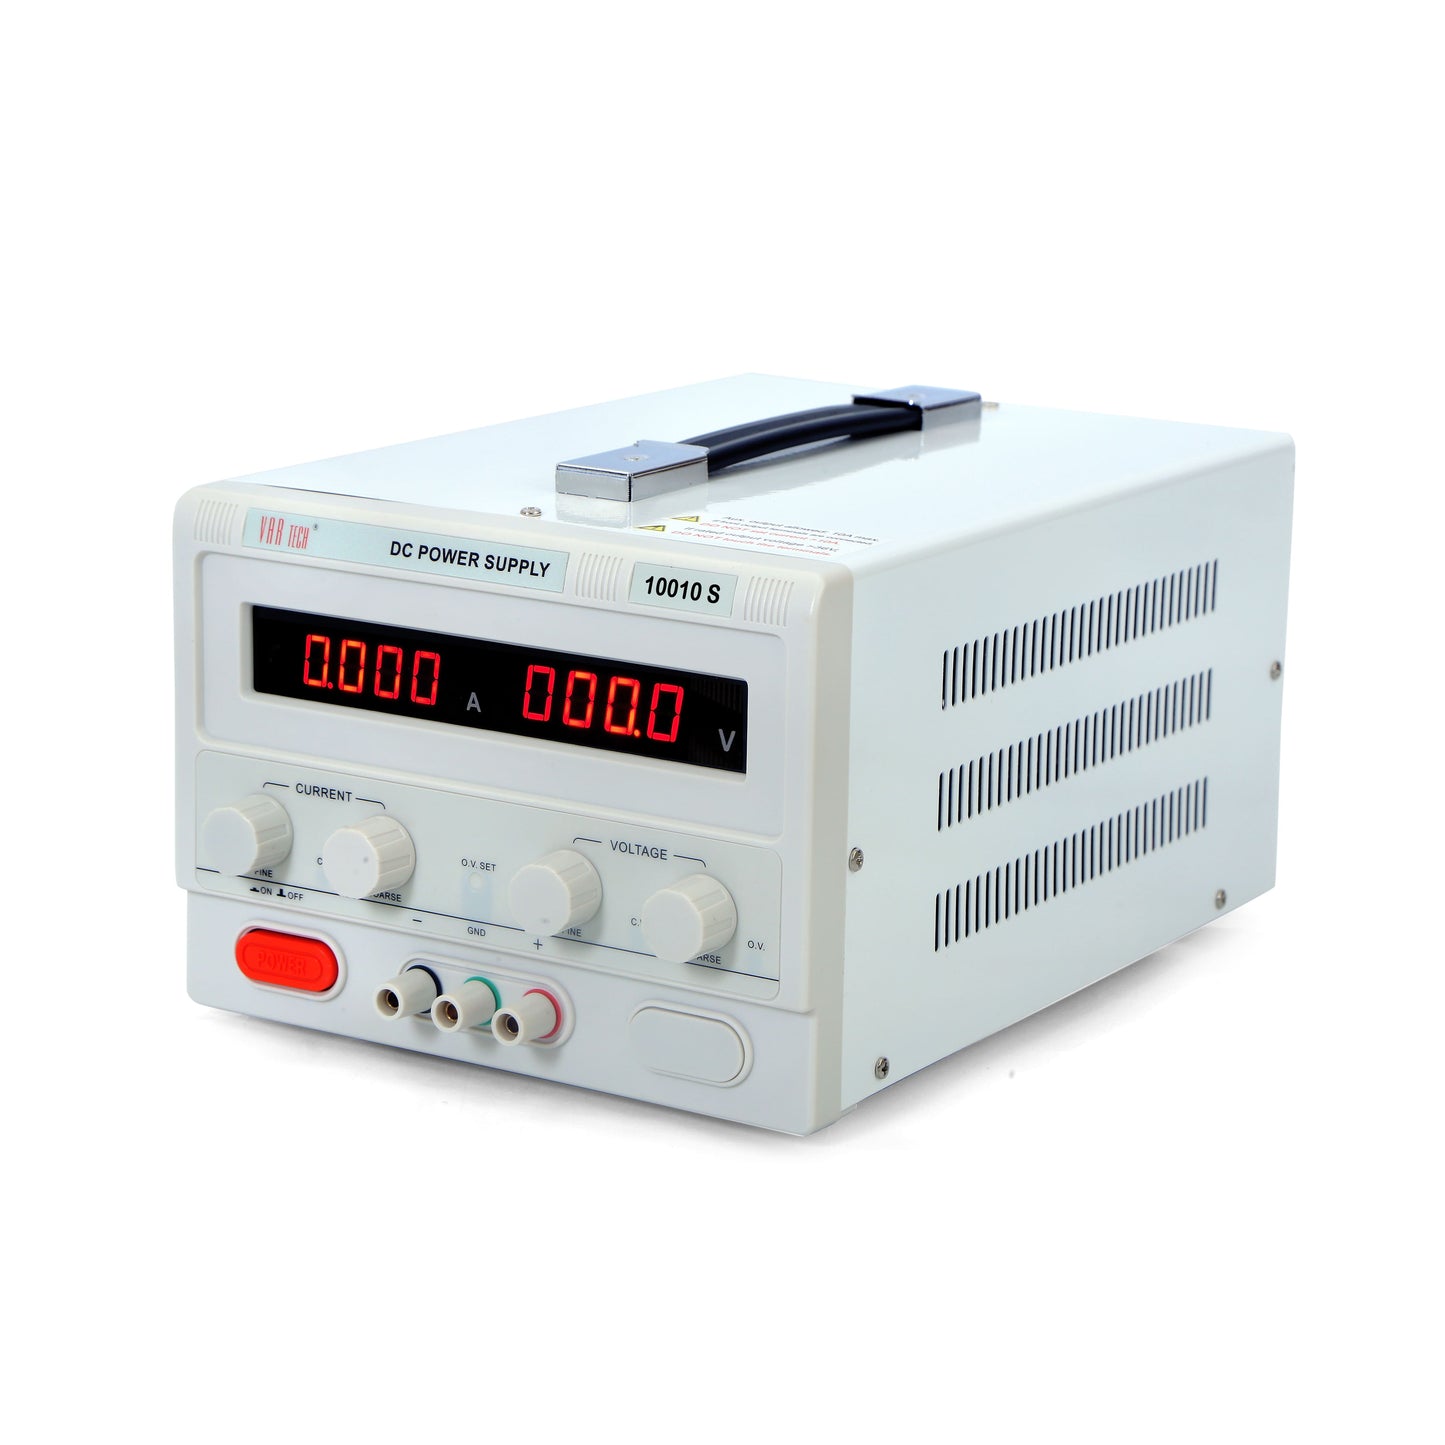 10010 S 100V 10A SMPS Based DC Regulated Power supply